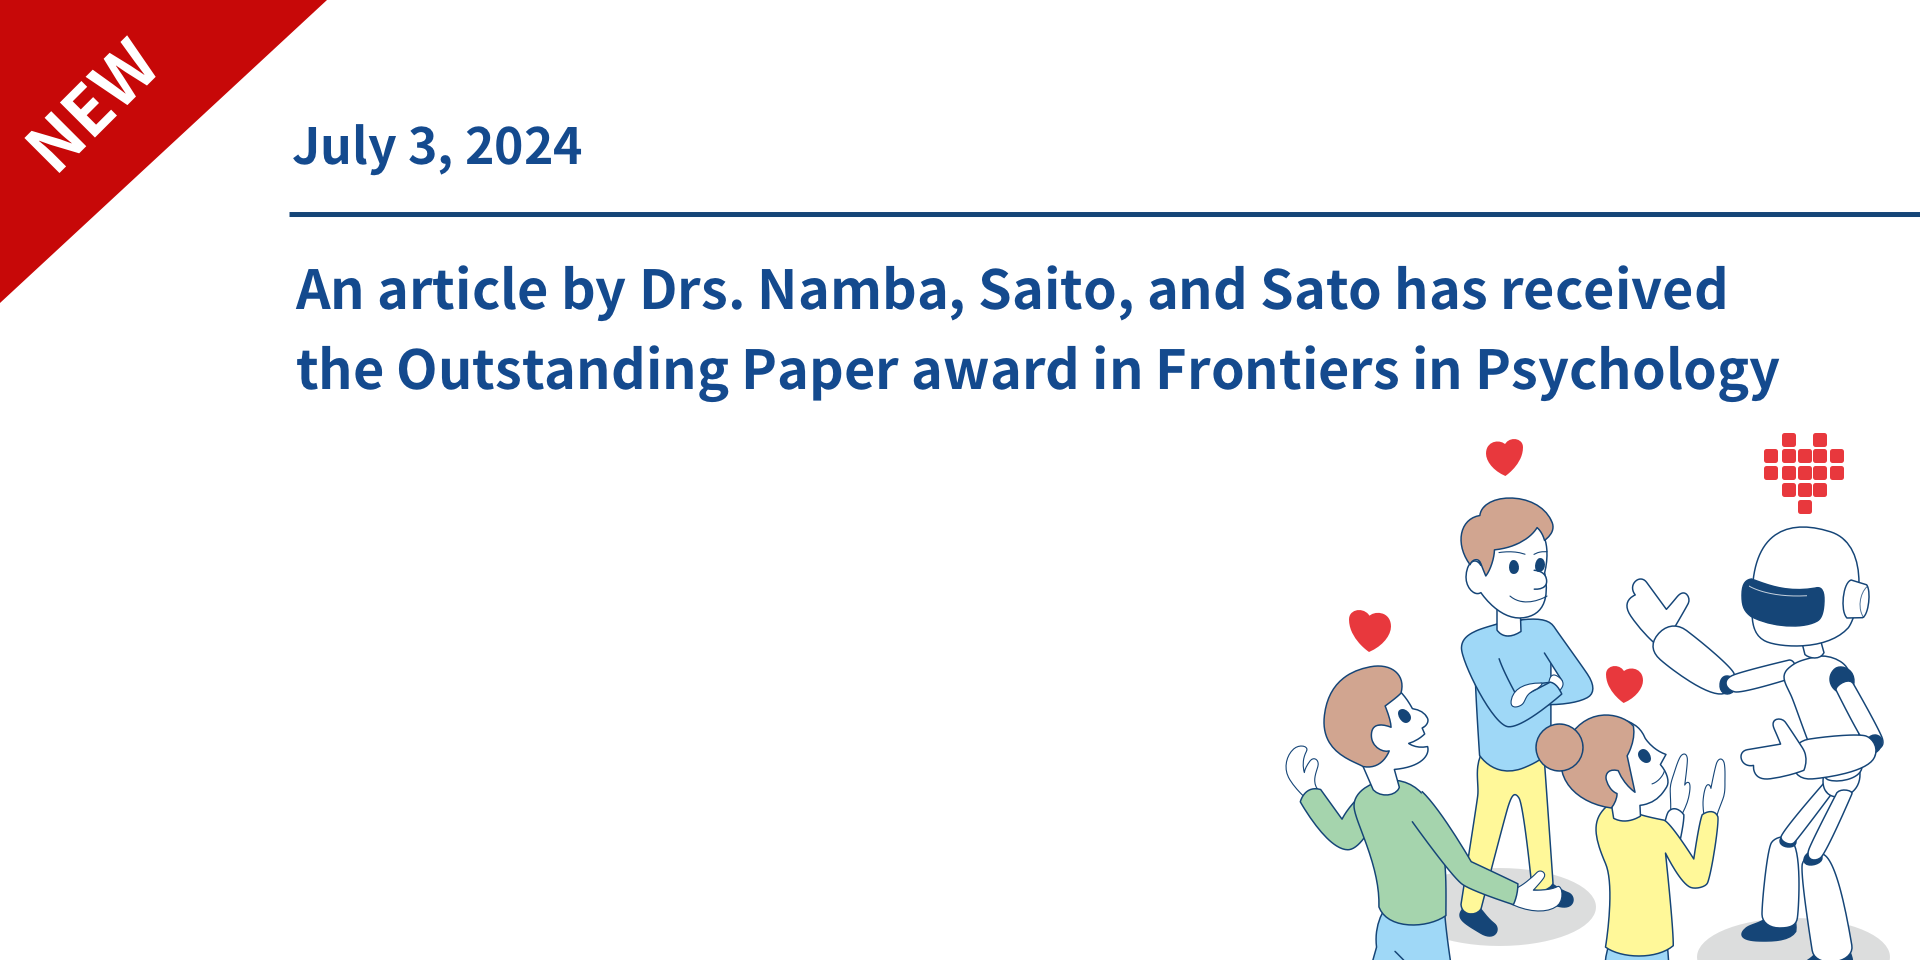 An article by Drs. Namba, Saito, and Sato has received the Outstanding Paper award in Frontiers in Psychology